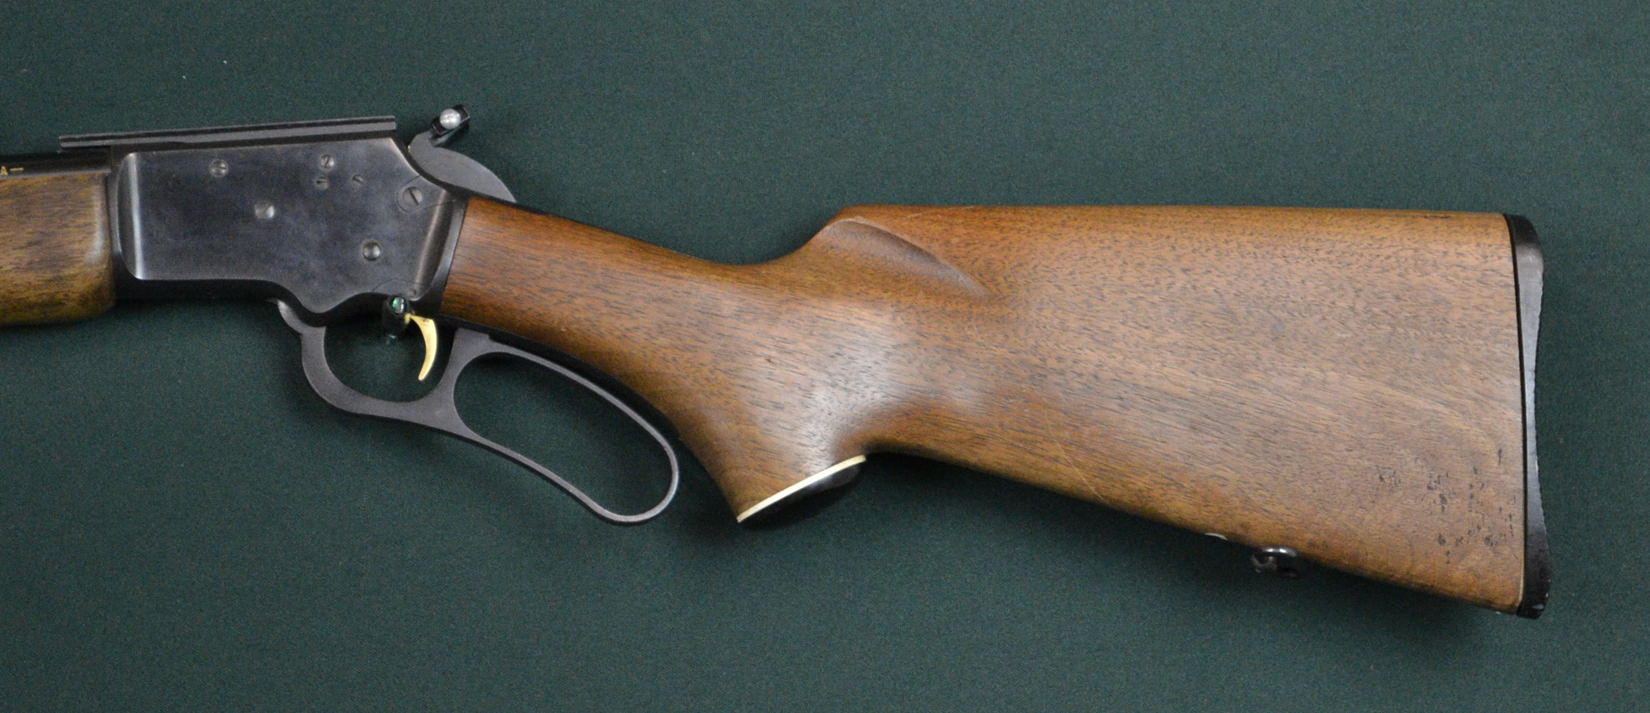 Marlin Model Golden 39a 22 Cal Lever Action Rifle For Sale At